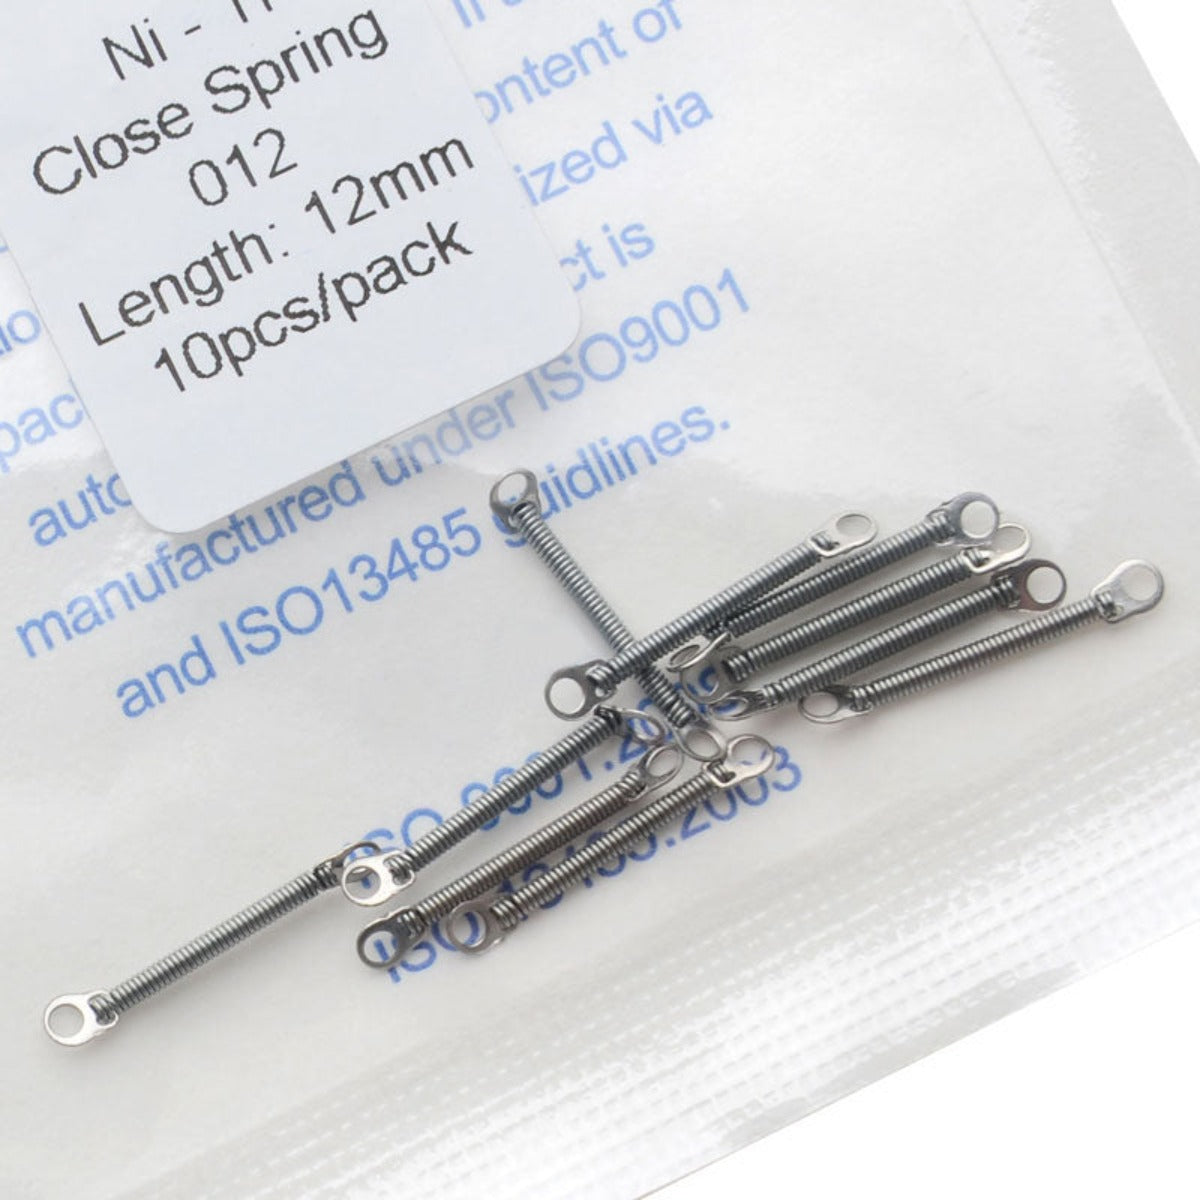 Orthodontic 0.012 12mm Closed Coil Spring 10pcs/Pack - pairaydental.com